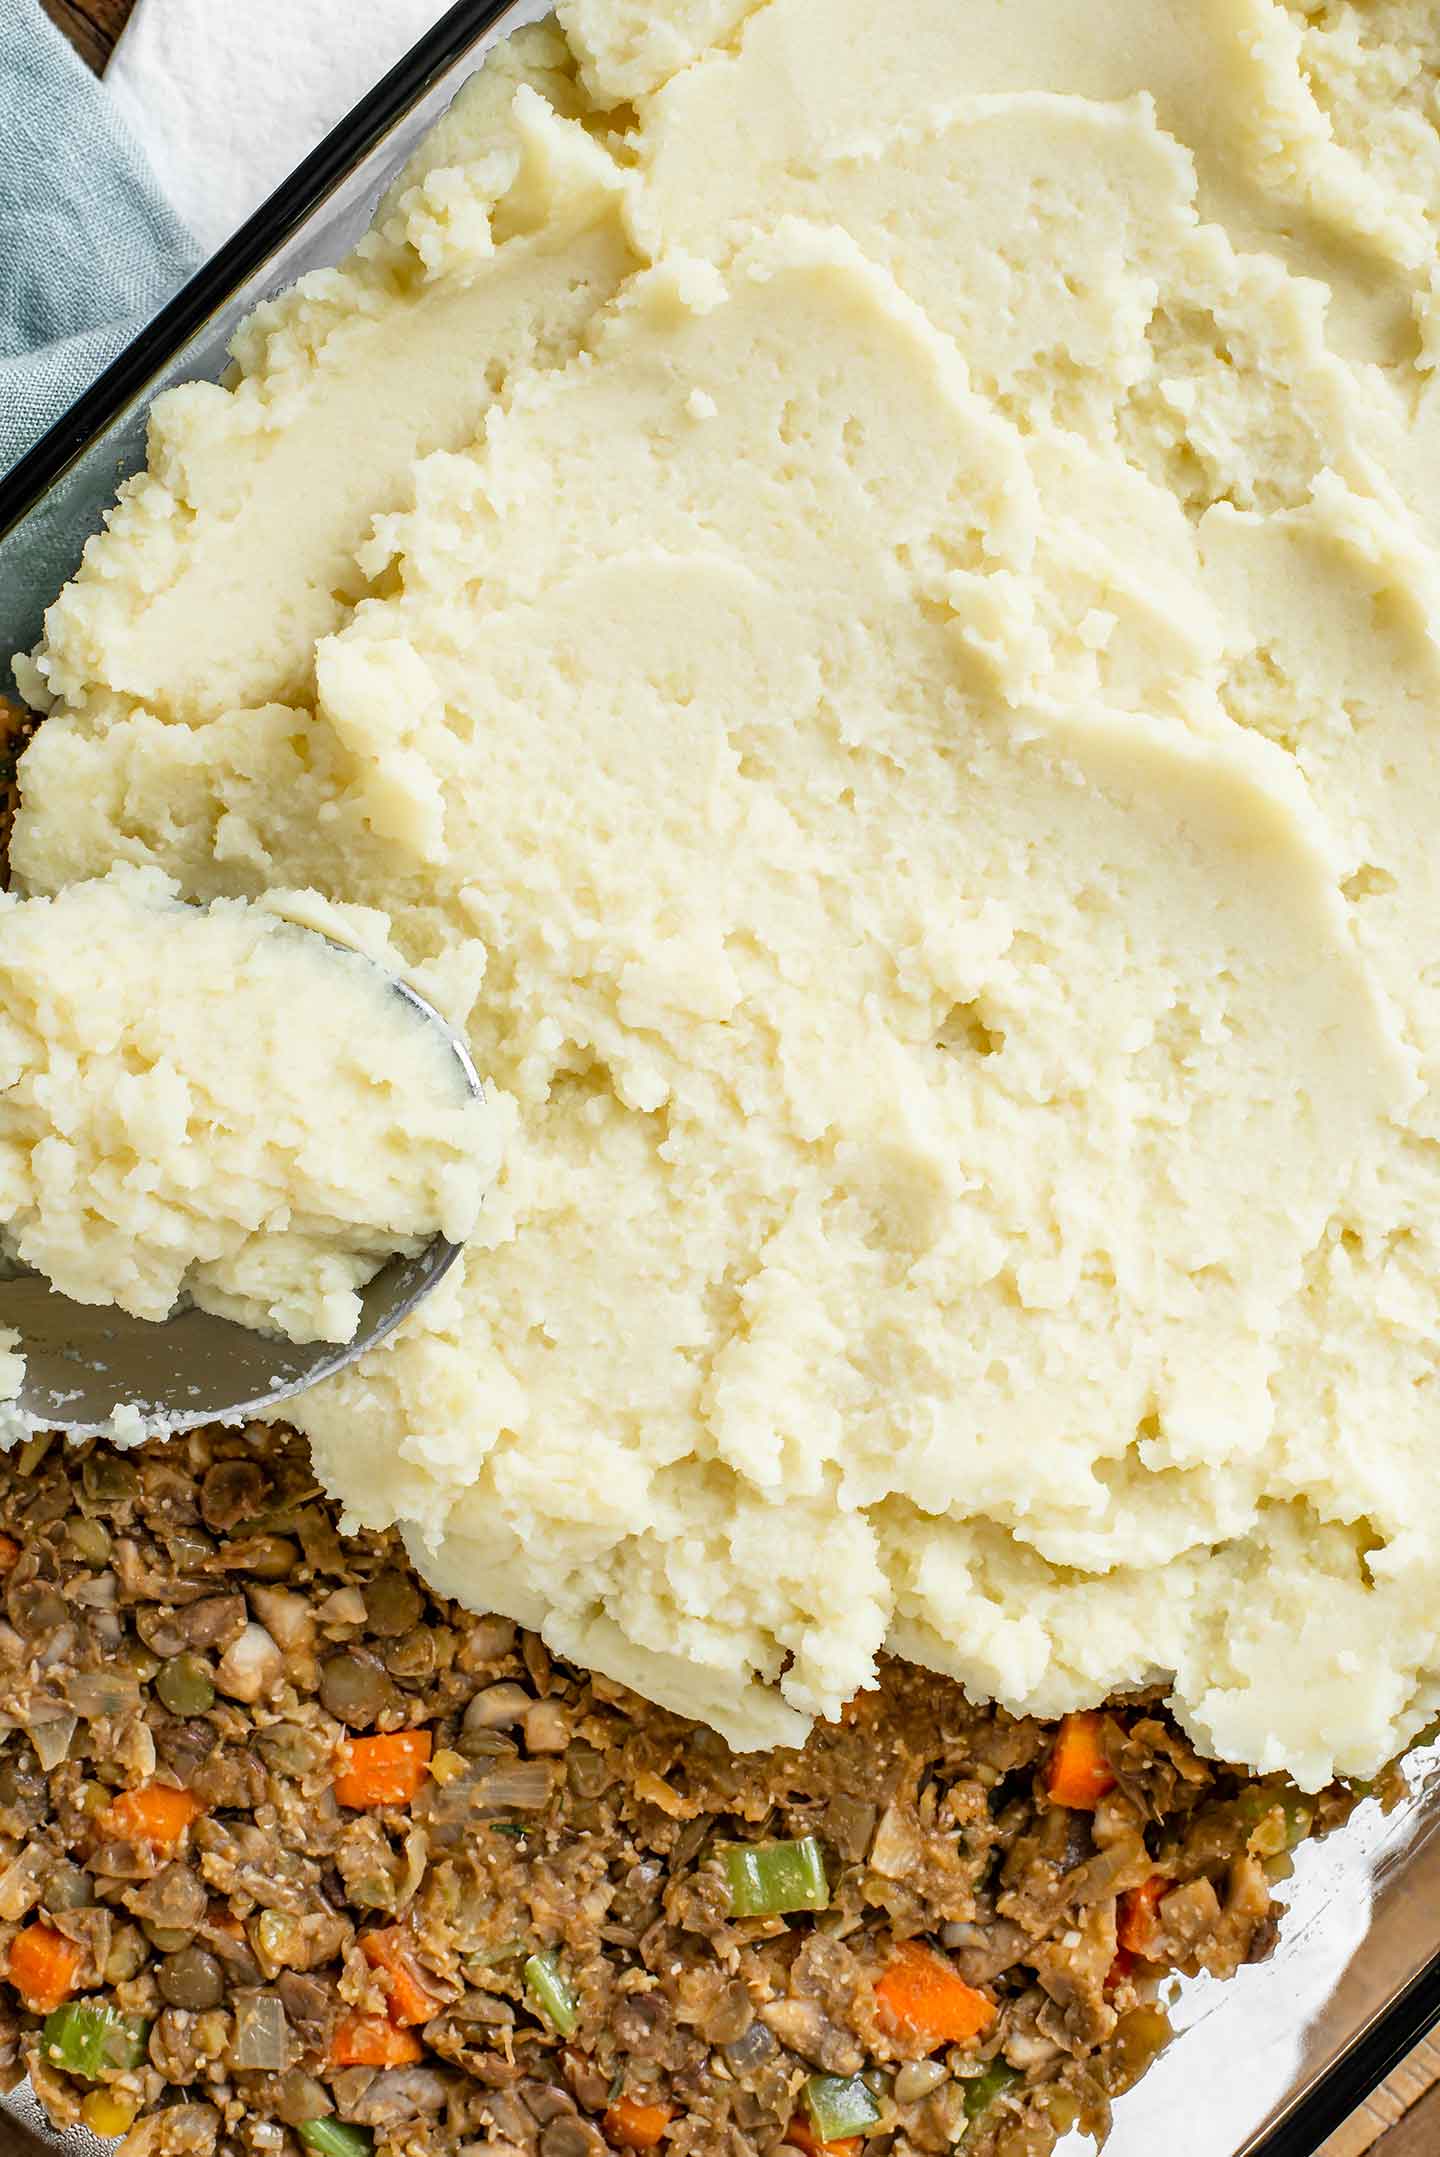 Top down view of mashed potatoes being spread over the lentil and vegetable base in a serving dish.